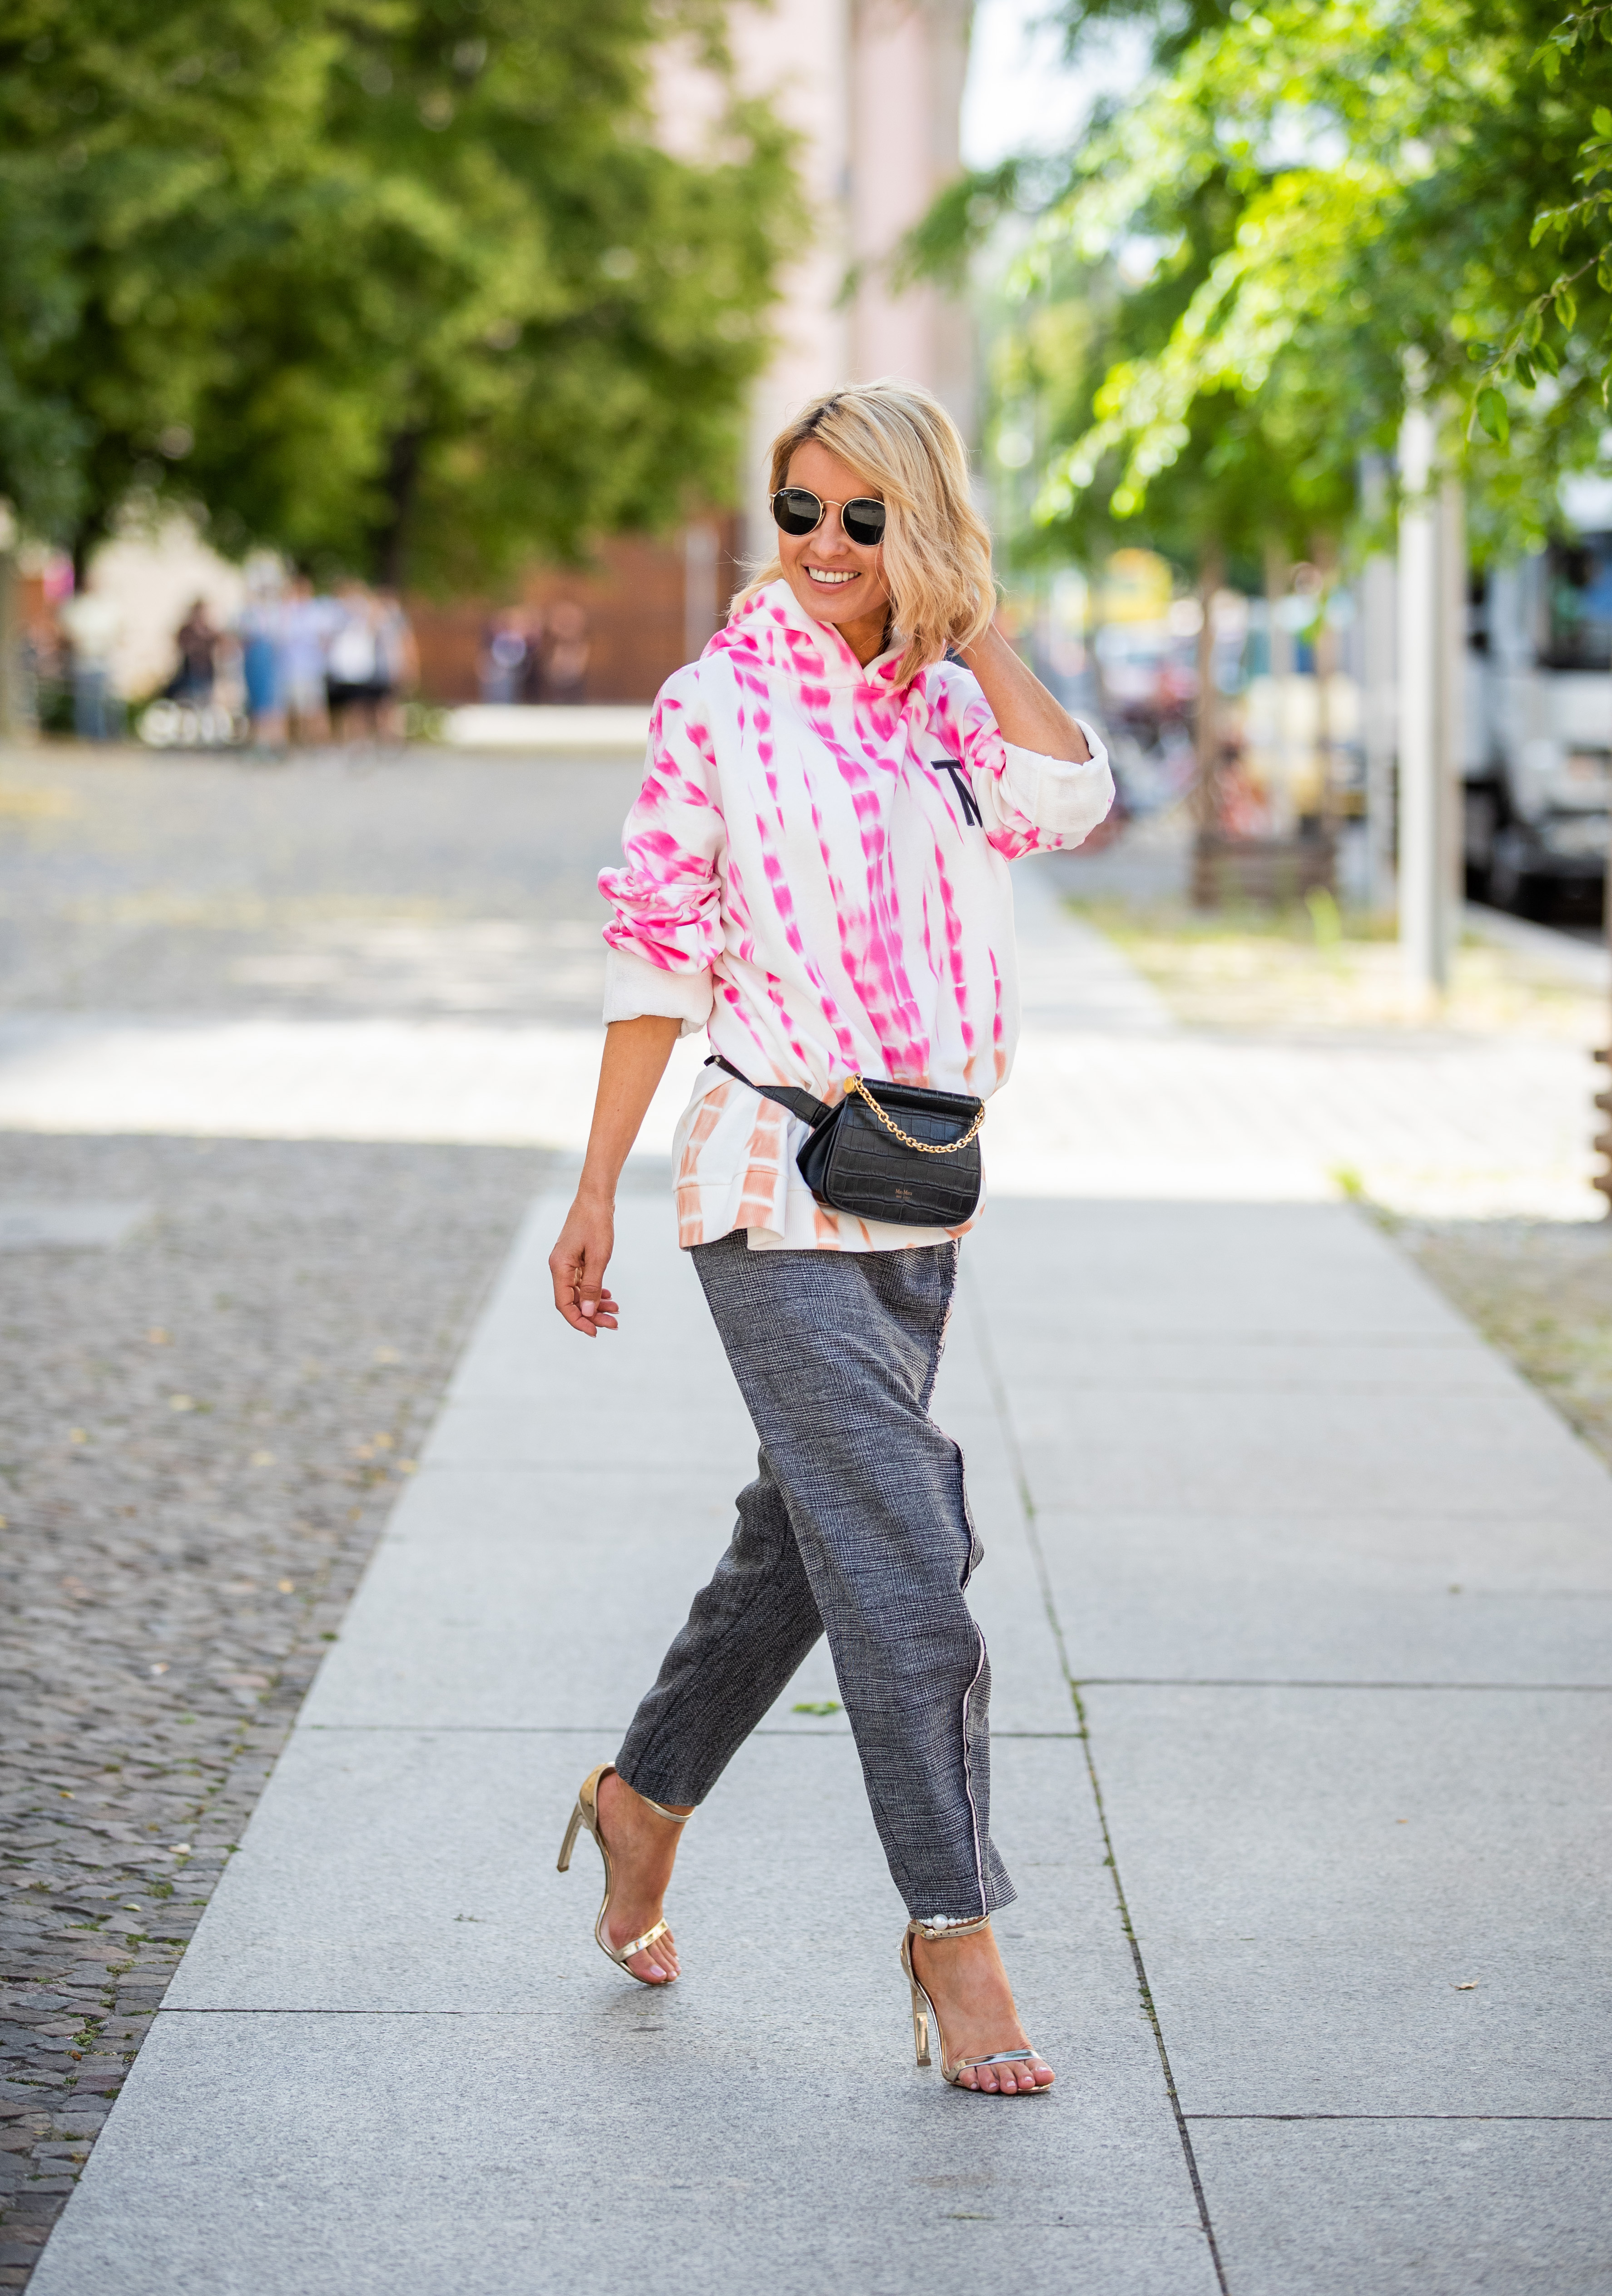 BERLIN, GERMANY - JULY 22: Gitta Banko is seen wearing a Tie dye oversized hoodie by Gitta Banko x The Mercer, an asymmetric pants by Balossa, a black belt bag by Max Mara, golden ankle-strap sandals with signature pearl embellishment at the junction of the heel and sole by Nicholas Kirkwood and sunglasses by Ray Ban on July 22, 2019 in Berlin, Germany. (Photo by Christian Vierig/Getty Images)